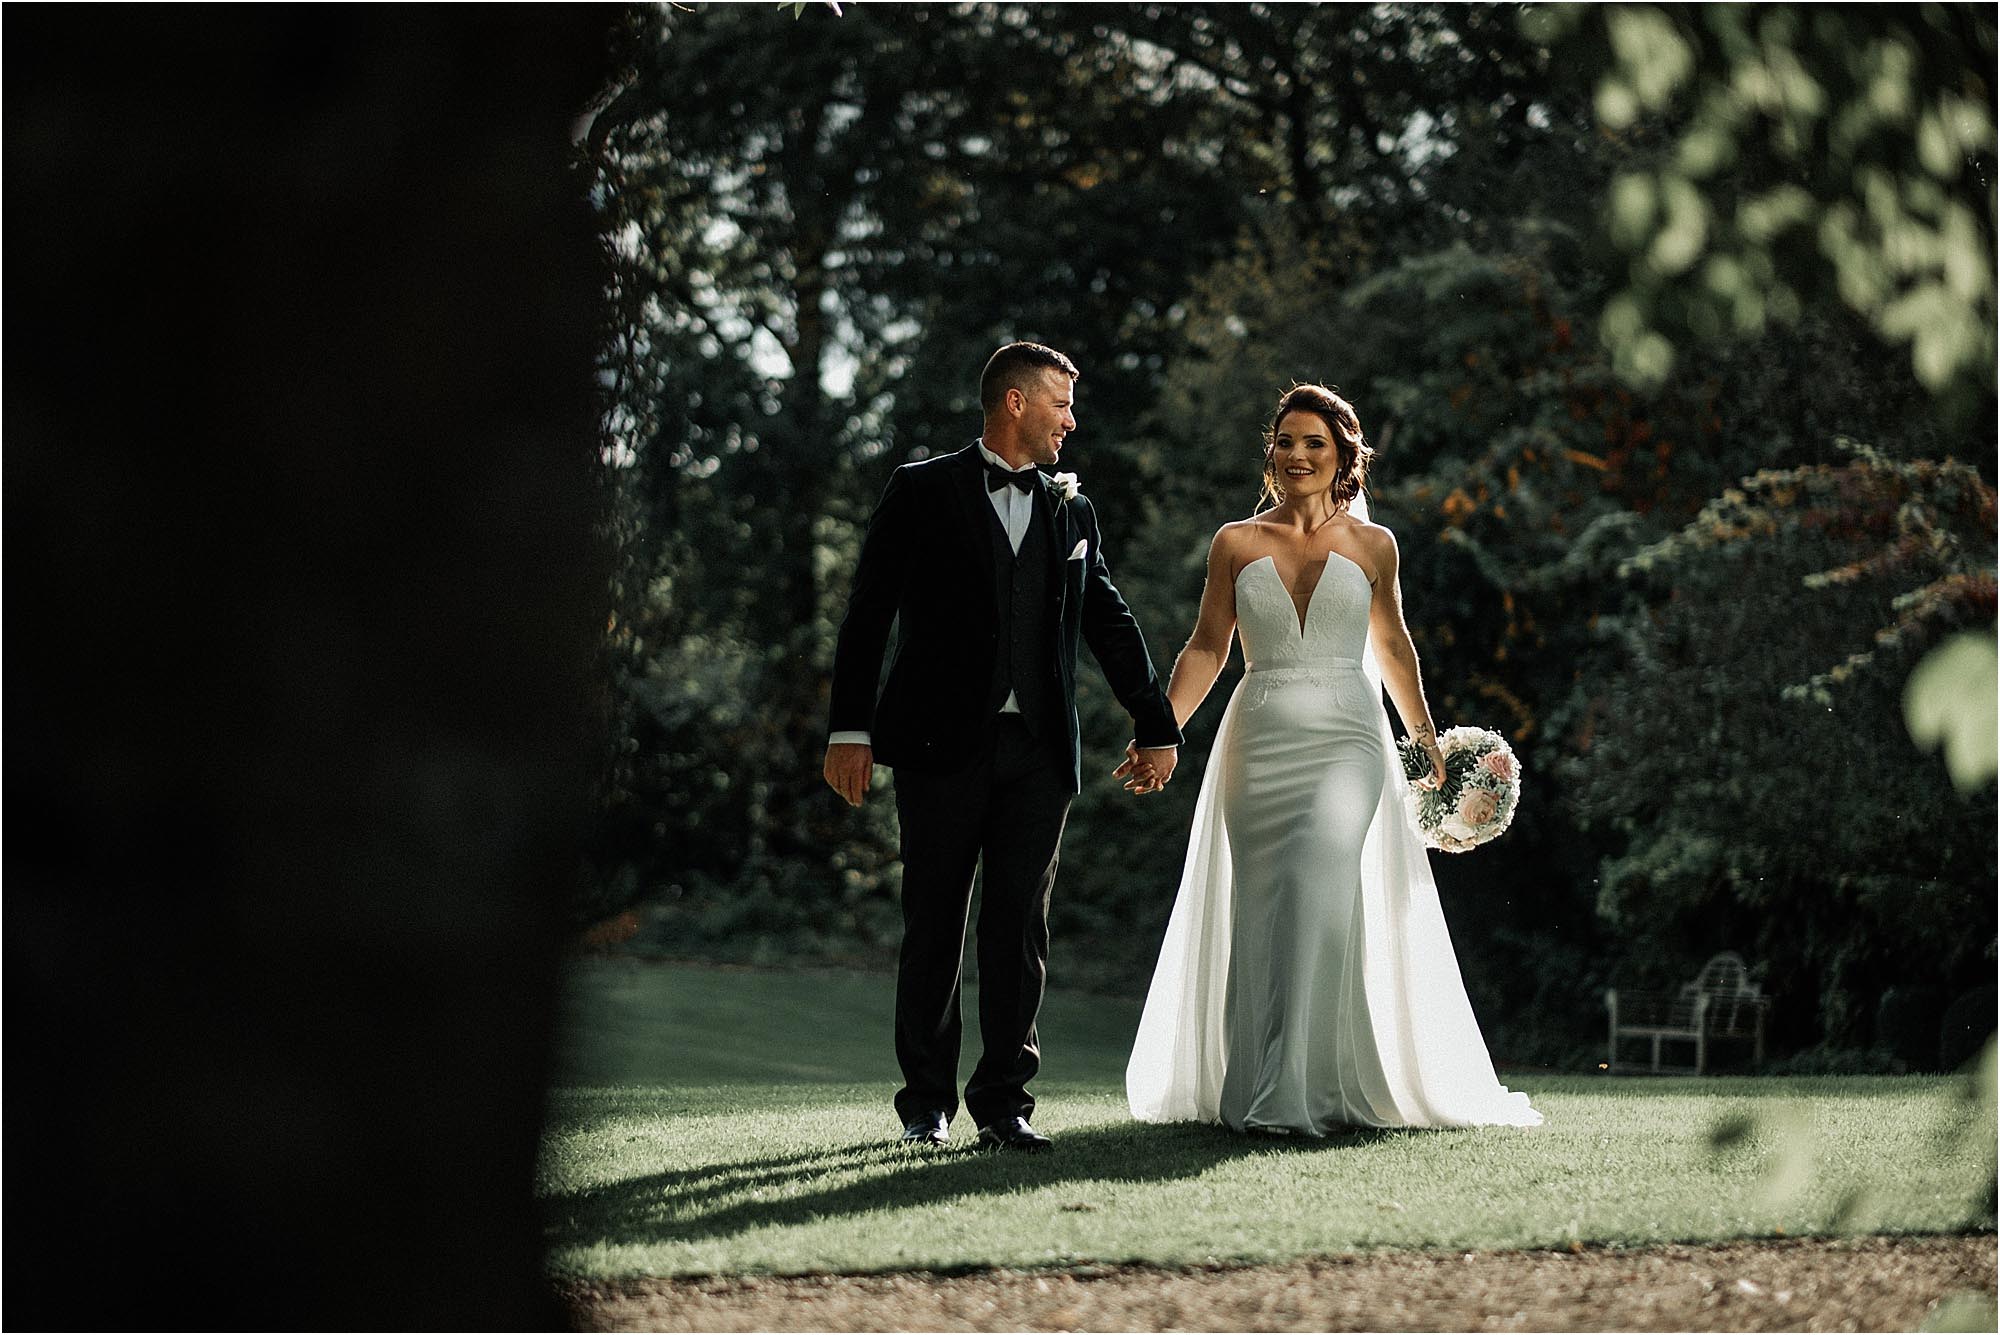 Rachel & Duncan’s black tie wedding at Kingston Estate, with Younger Photography